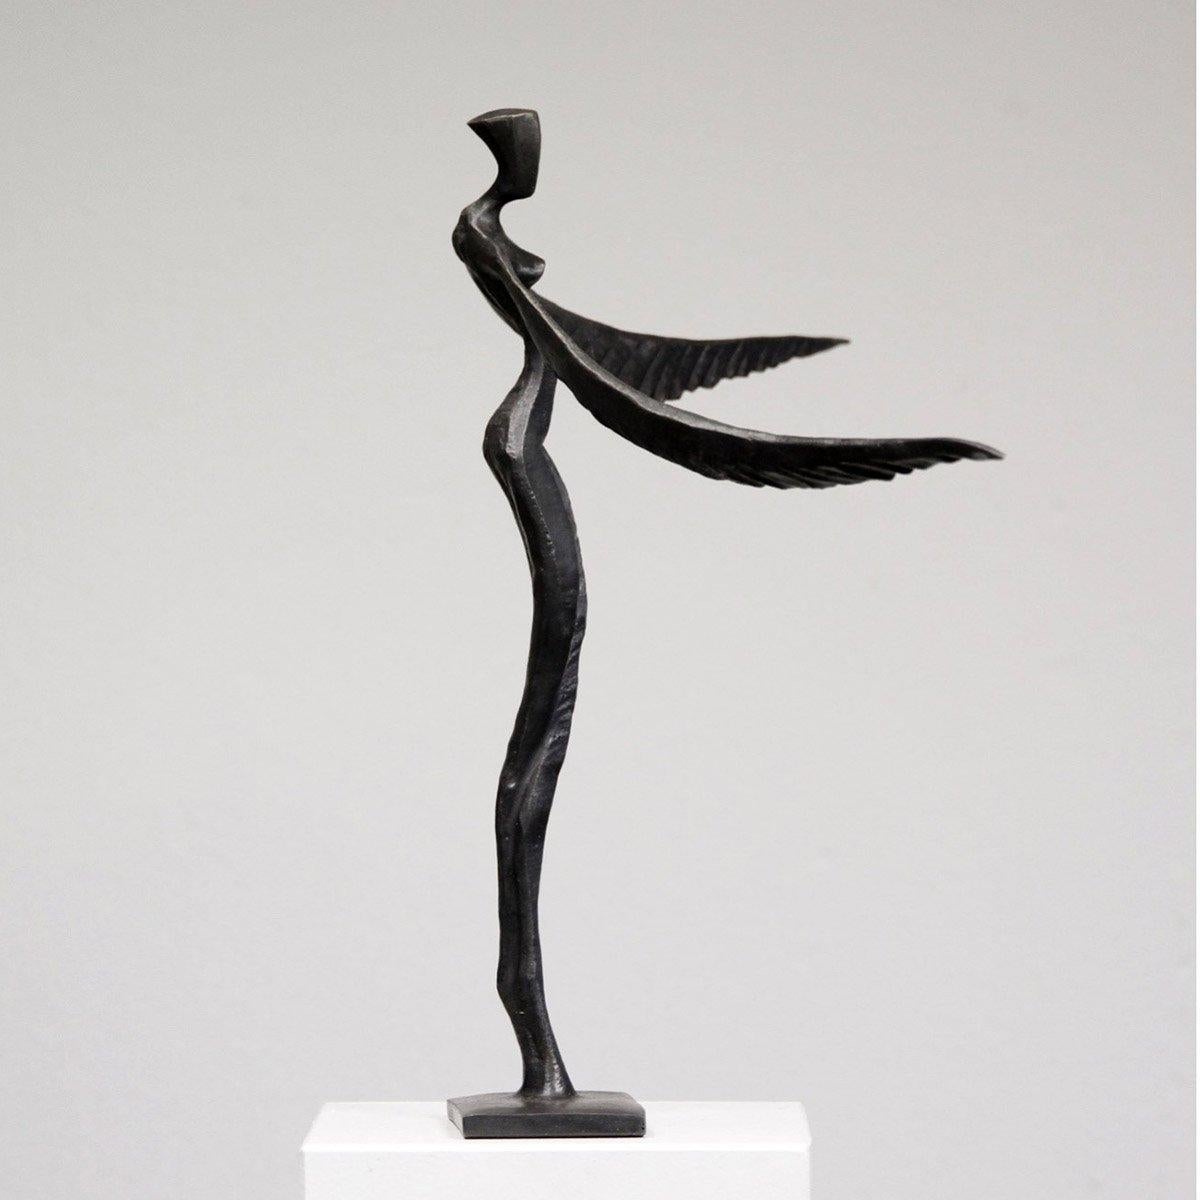 Fae – Victoria is an elegant figurative bronze sculpture by Nando Kallweit.

Inspired by the the legend of the phoenix, this female figure has graceful wings instead of arms.  The piece, and its dual name, alludes to the strength and rebirth that is